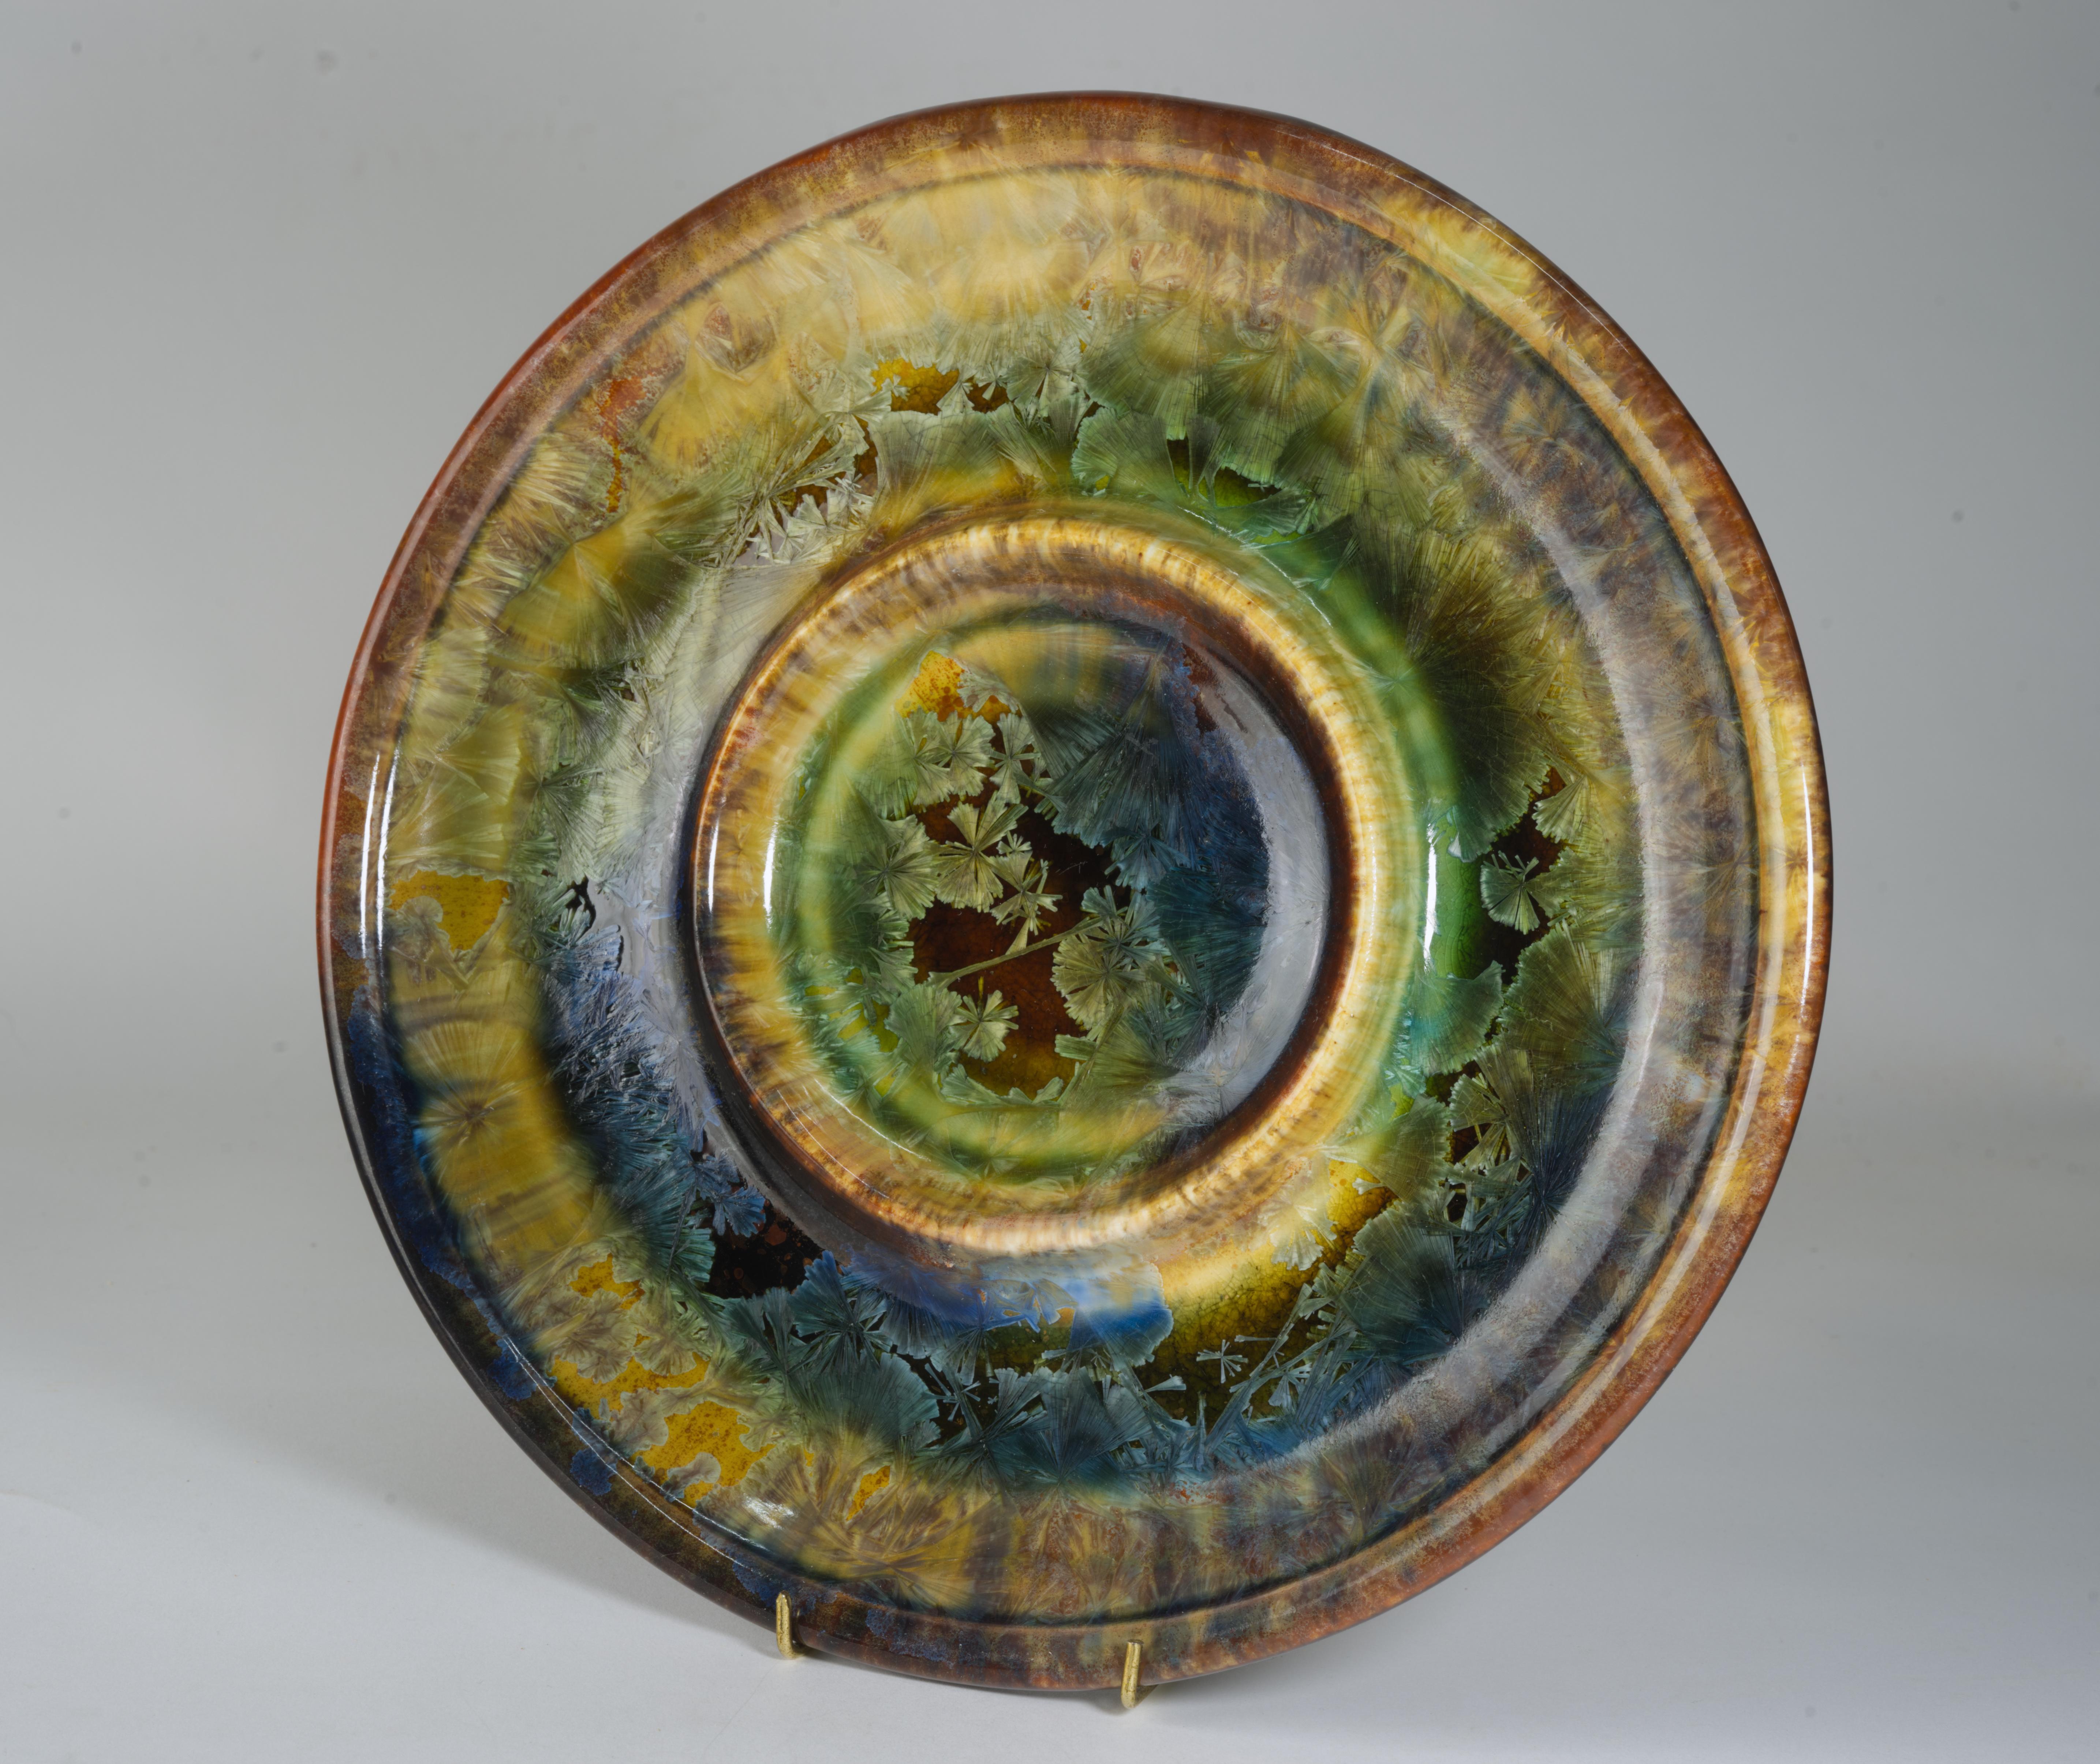  Pair of round divided plates was handmade by Kent Follette of Follette Pottery. Each plate has two compartments and is hand decorated with elaborate crystalline glaze in brown and blue palette, creating an appearance of ice breaking on top of the